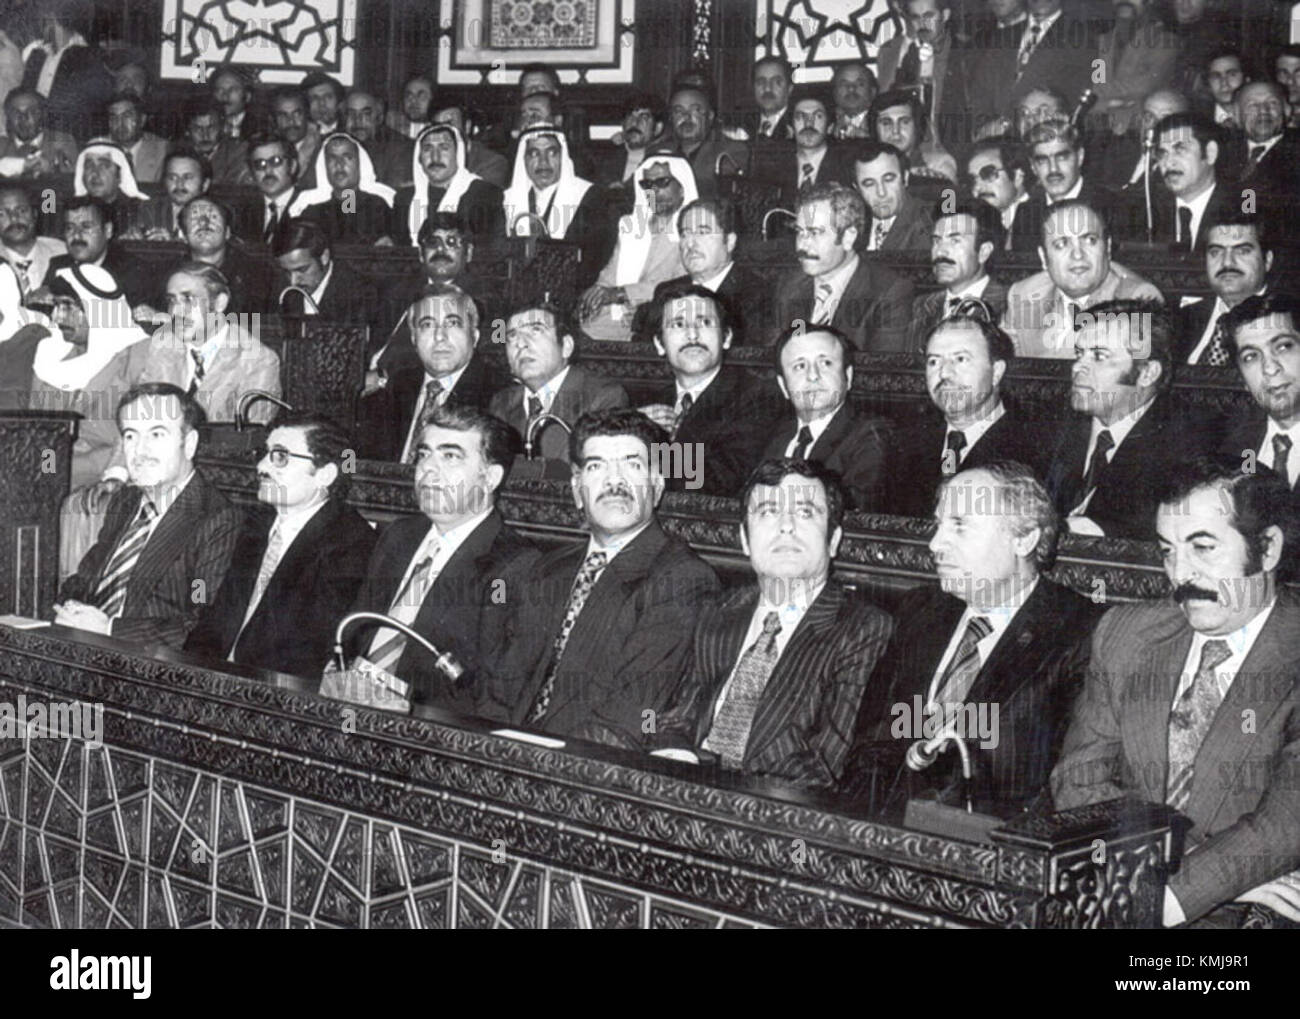 The first innaugaration of President Hafez al-Assad in Parliament - March 1971 Stock Photo